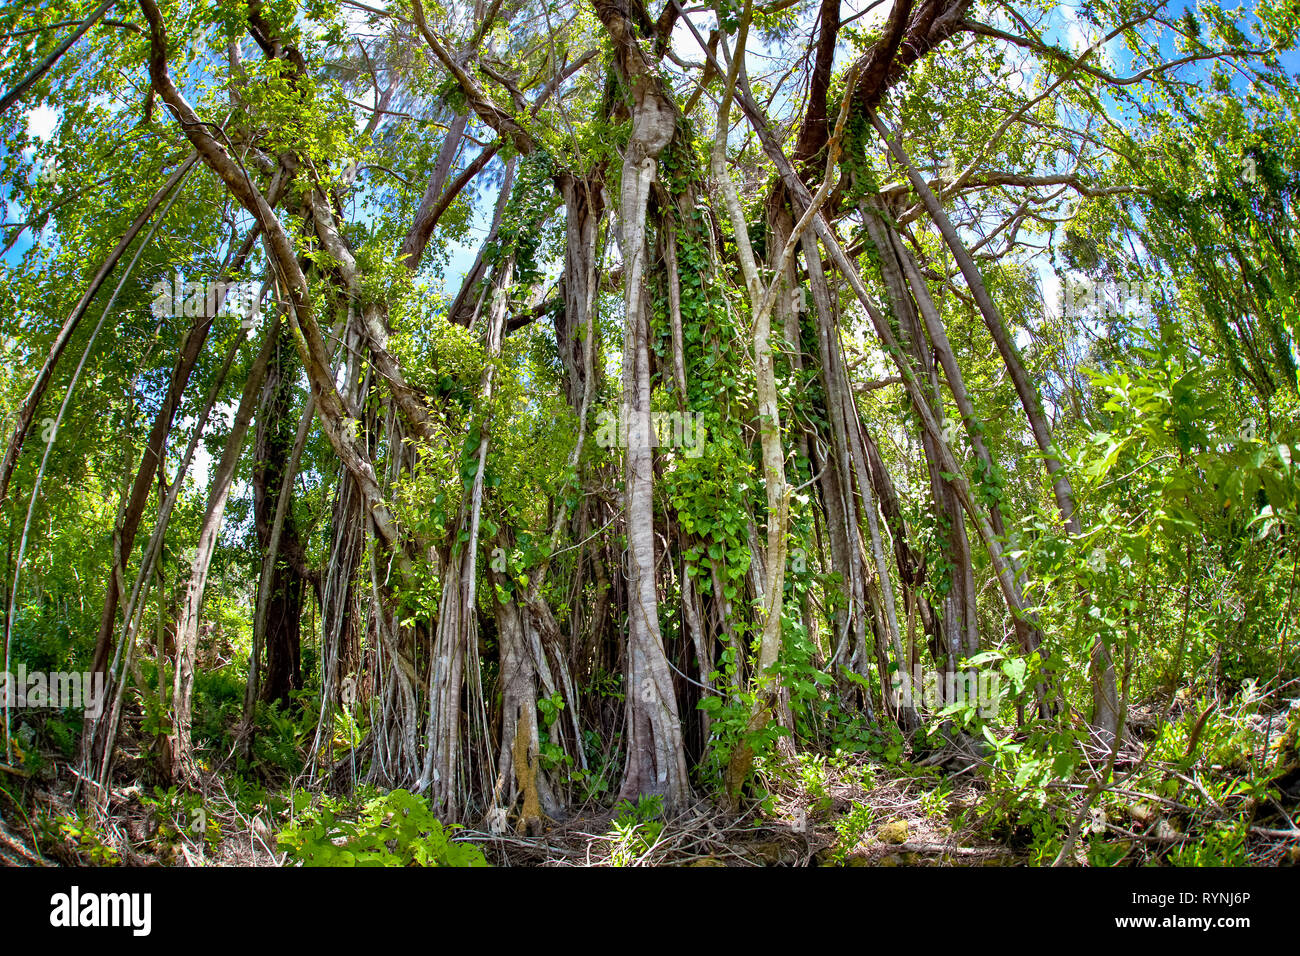 fig tree, Ficus sp., growing fast in the jungle on the island of Peleliu, Palau, Pacific Ocean Stock Photo